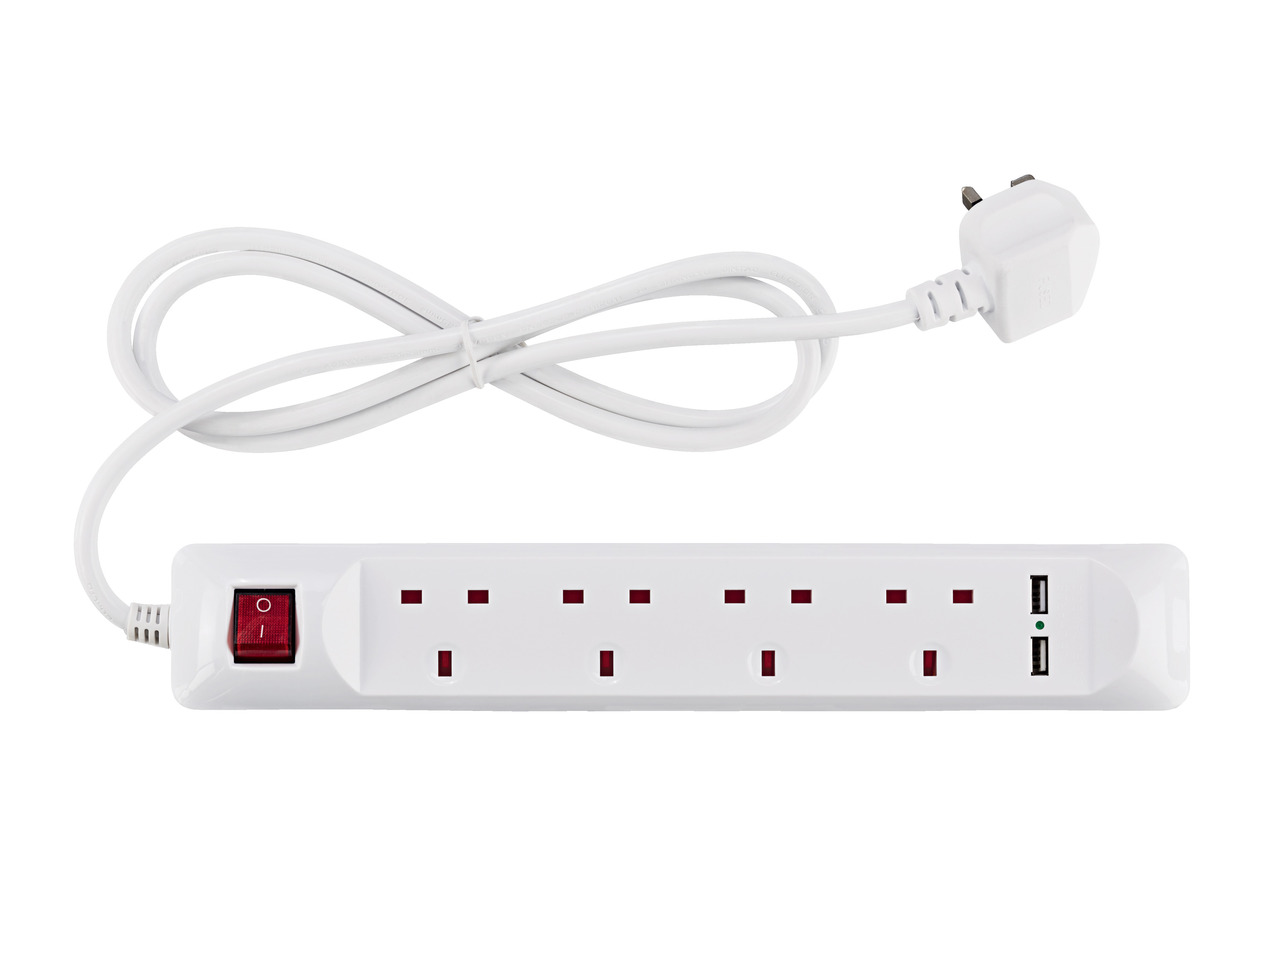 POWERFIX 4 Socket Extension Lead with USB Ports